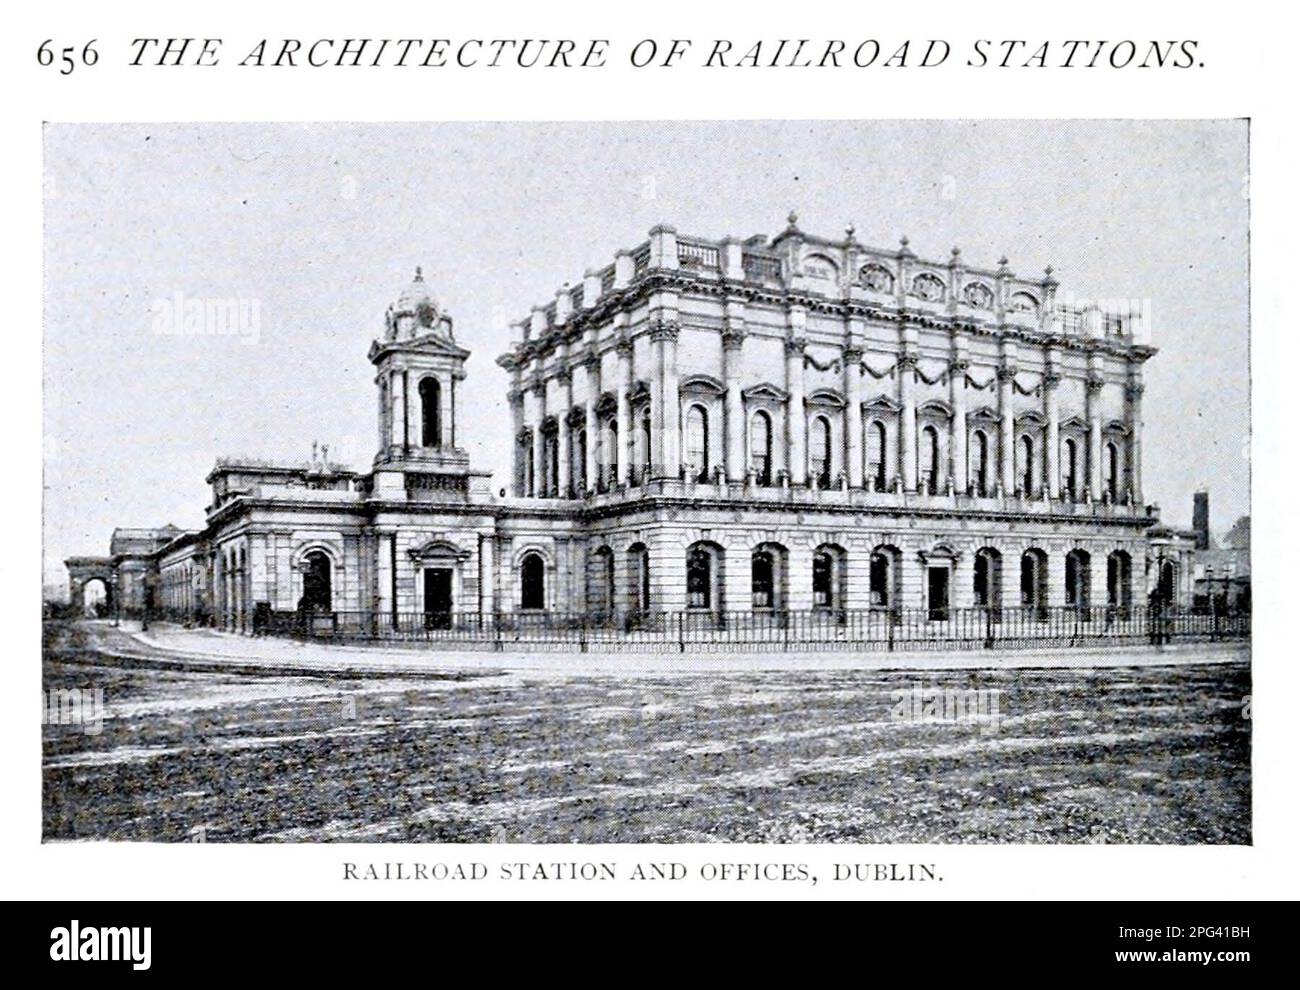 Train Station in Dublin, Ireland from the Article THE ARCHITECTURE OF RAILROAD STATIONS by Bradford L. Gilbert  from The Engineering Magazine DEVOTED TO INDUSTRIAL PROGRESS Volume IX April to September, 1895 NEW YORK The Engineering Magazine Co Stock Photo